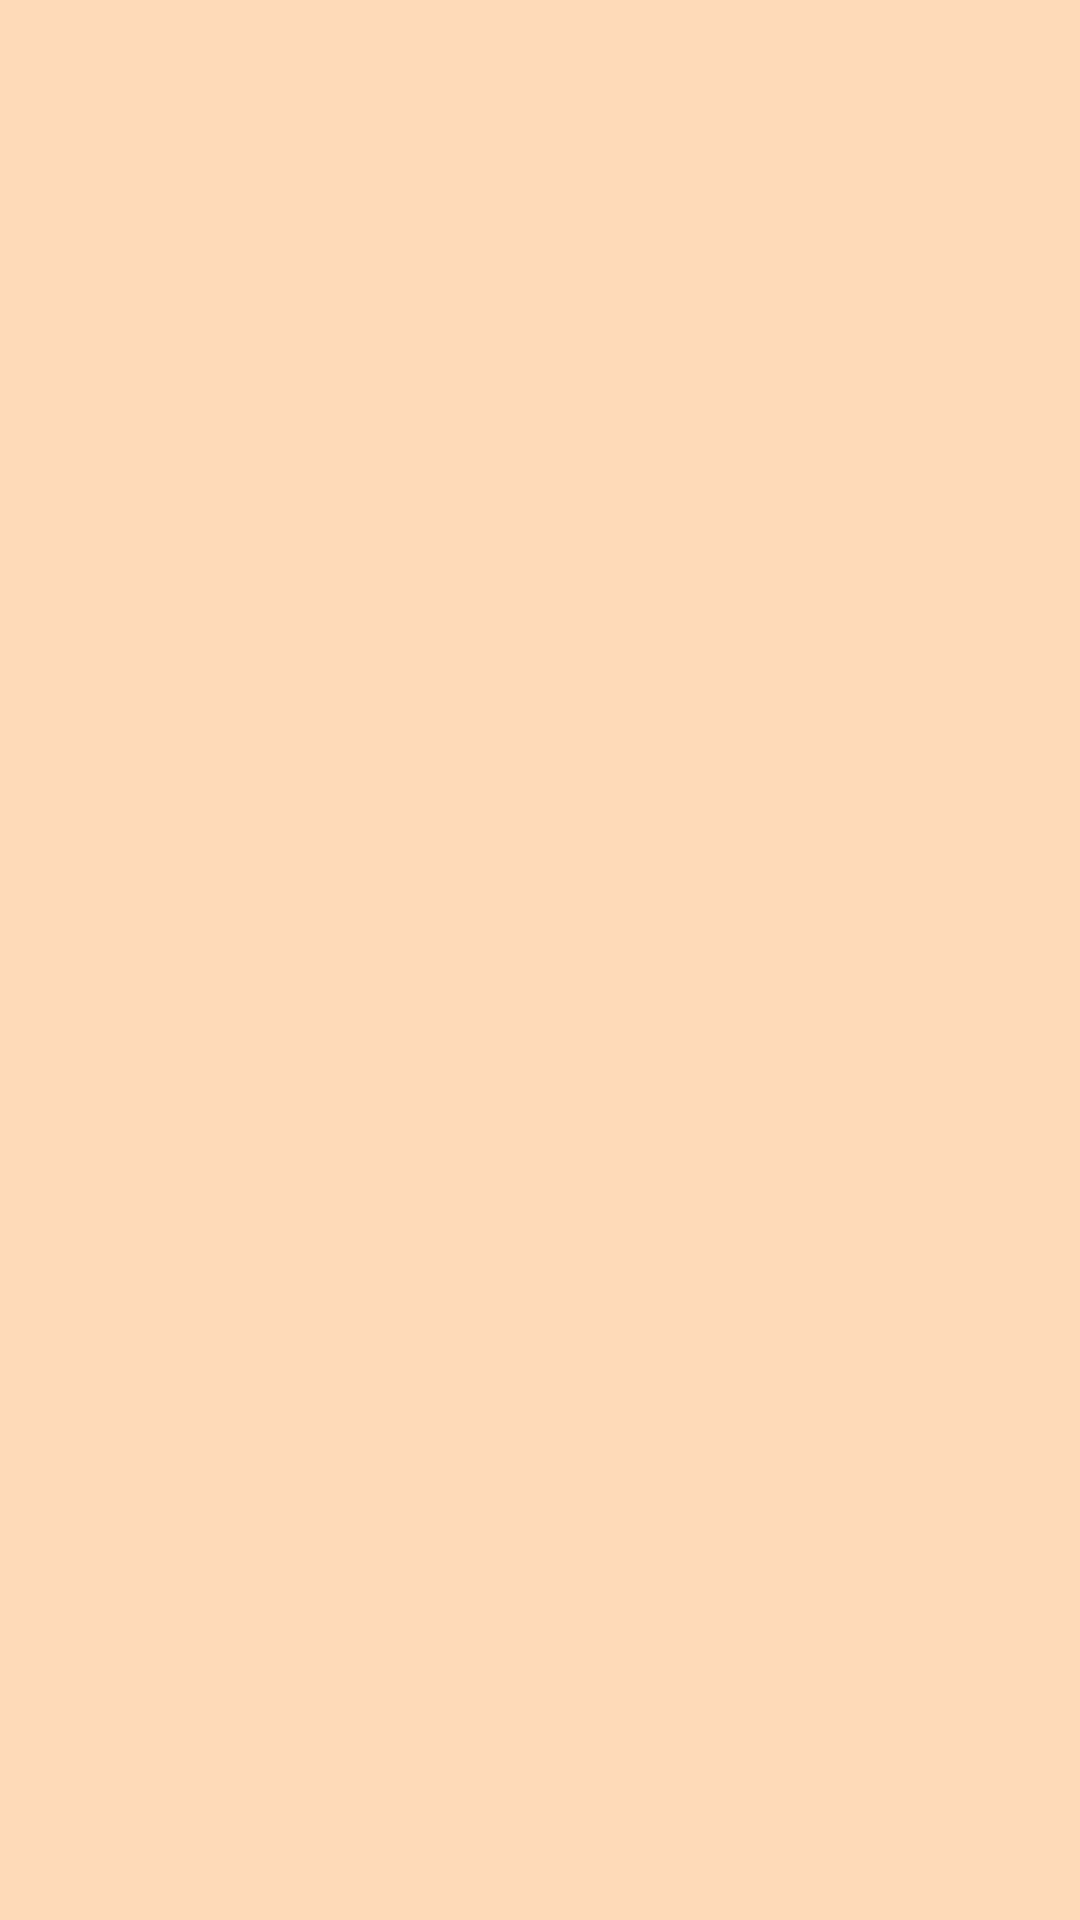 1080x1920 Peach Puff Solid Color Background